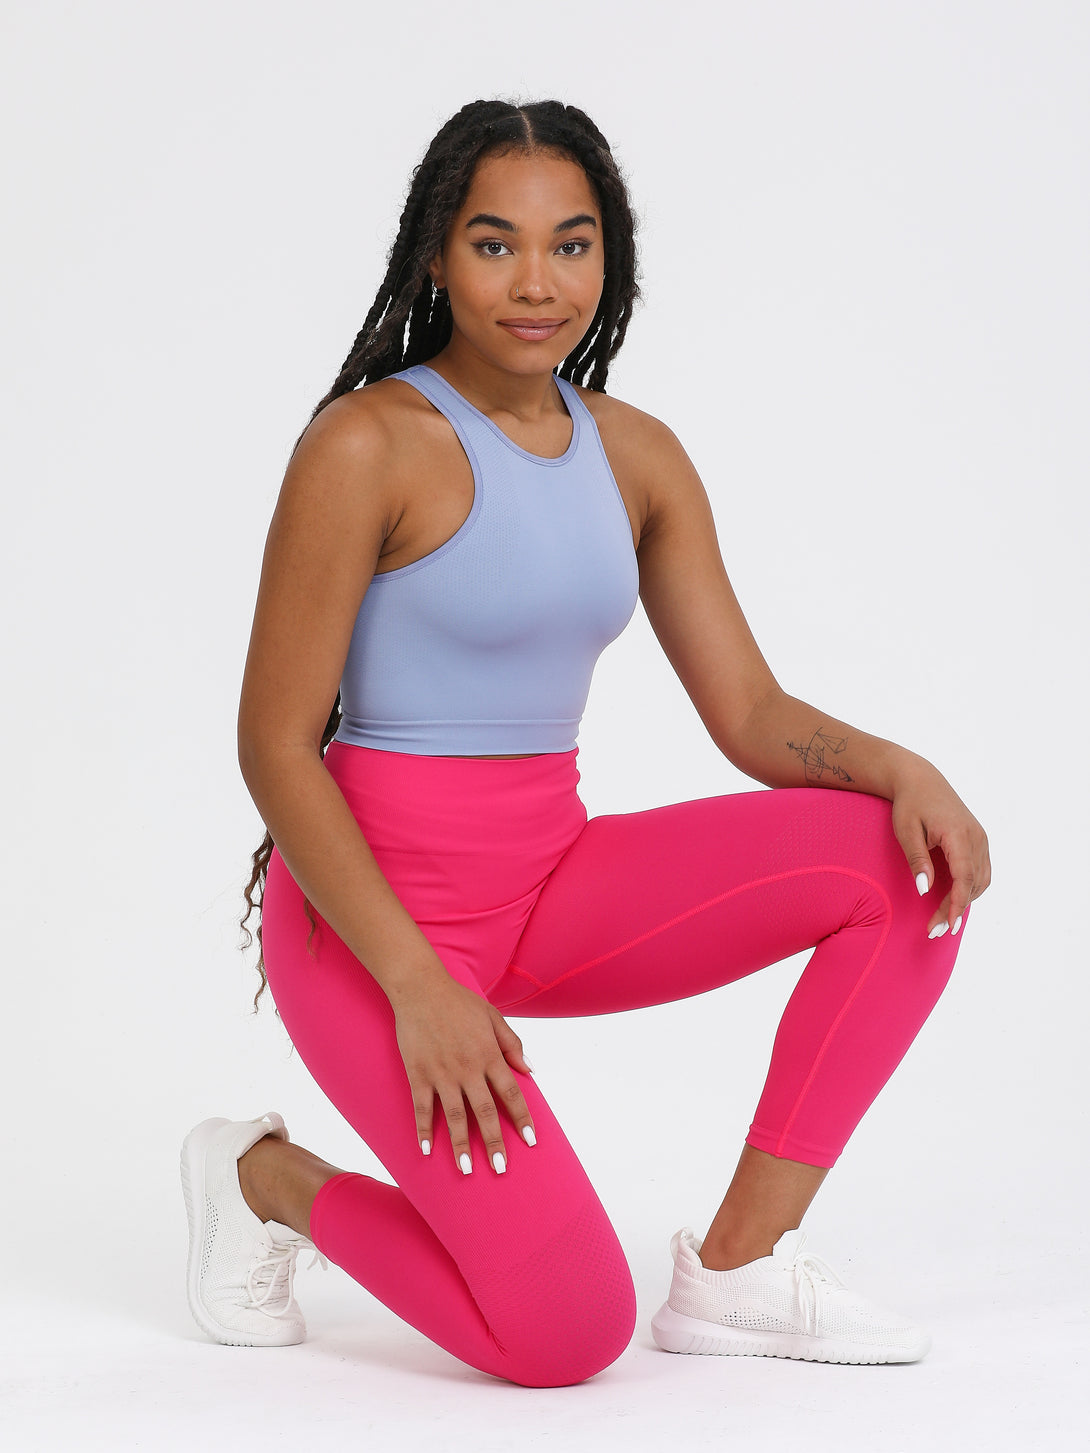 A Woman Wearing Purple Impression Color All-Day Seamless Sleeveless Crop Top